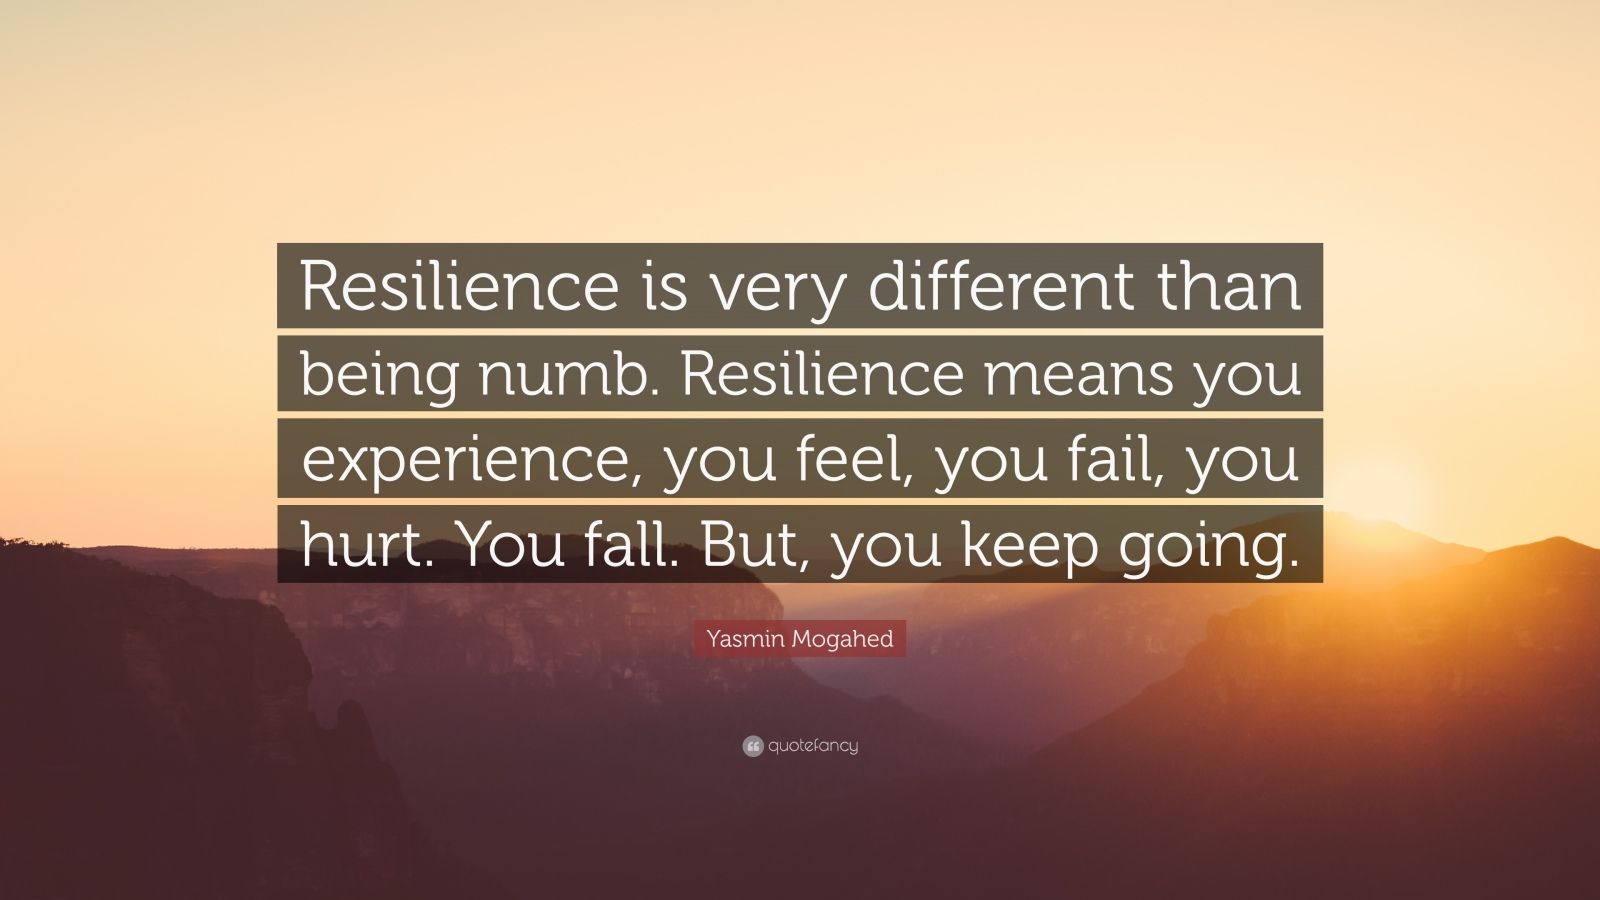 Yasmin Mogahed Quote: “Resilience is very different than being numb. Resilience means you experience, you feel, you fail, you hurt. You fall. B.”